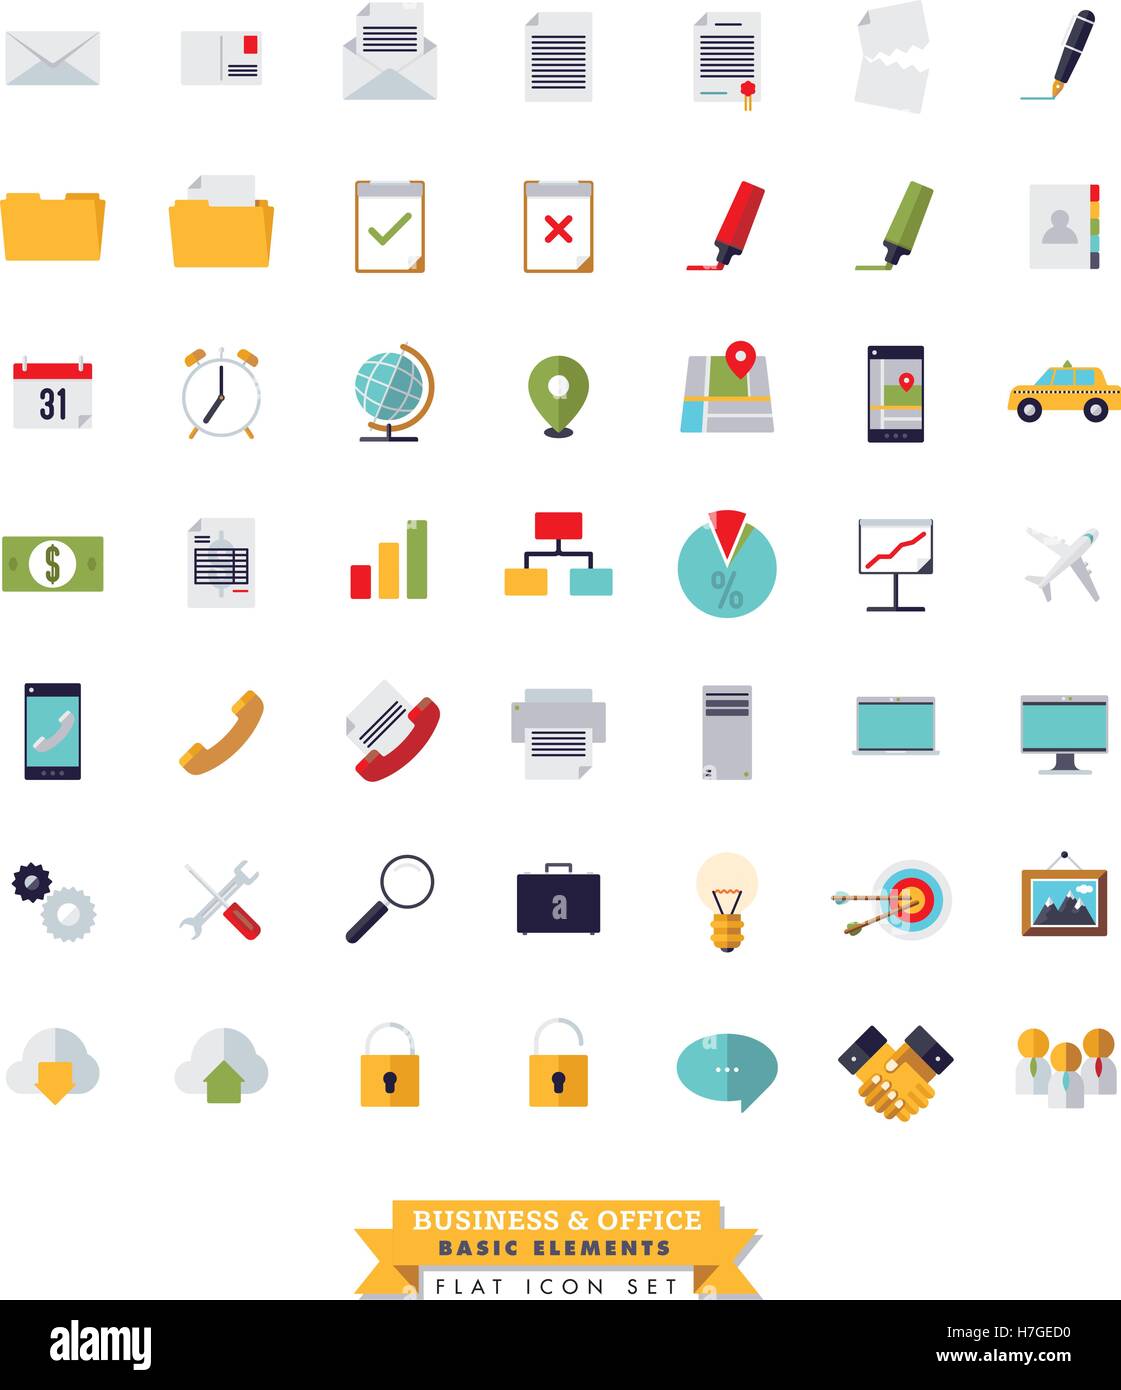 Collection of 49 flat design basic business and office isolated icons Stock Vector